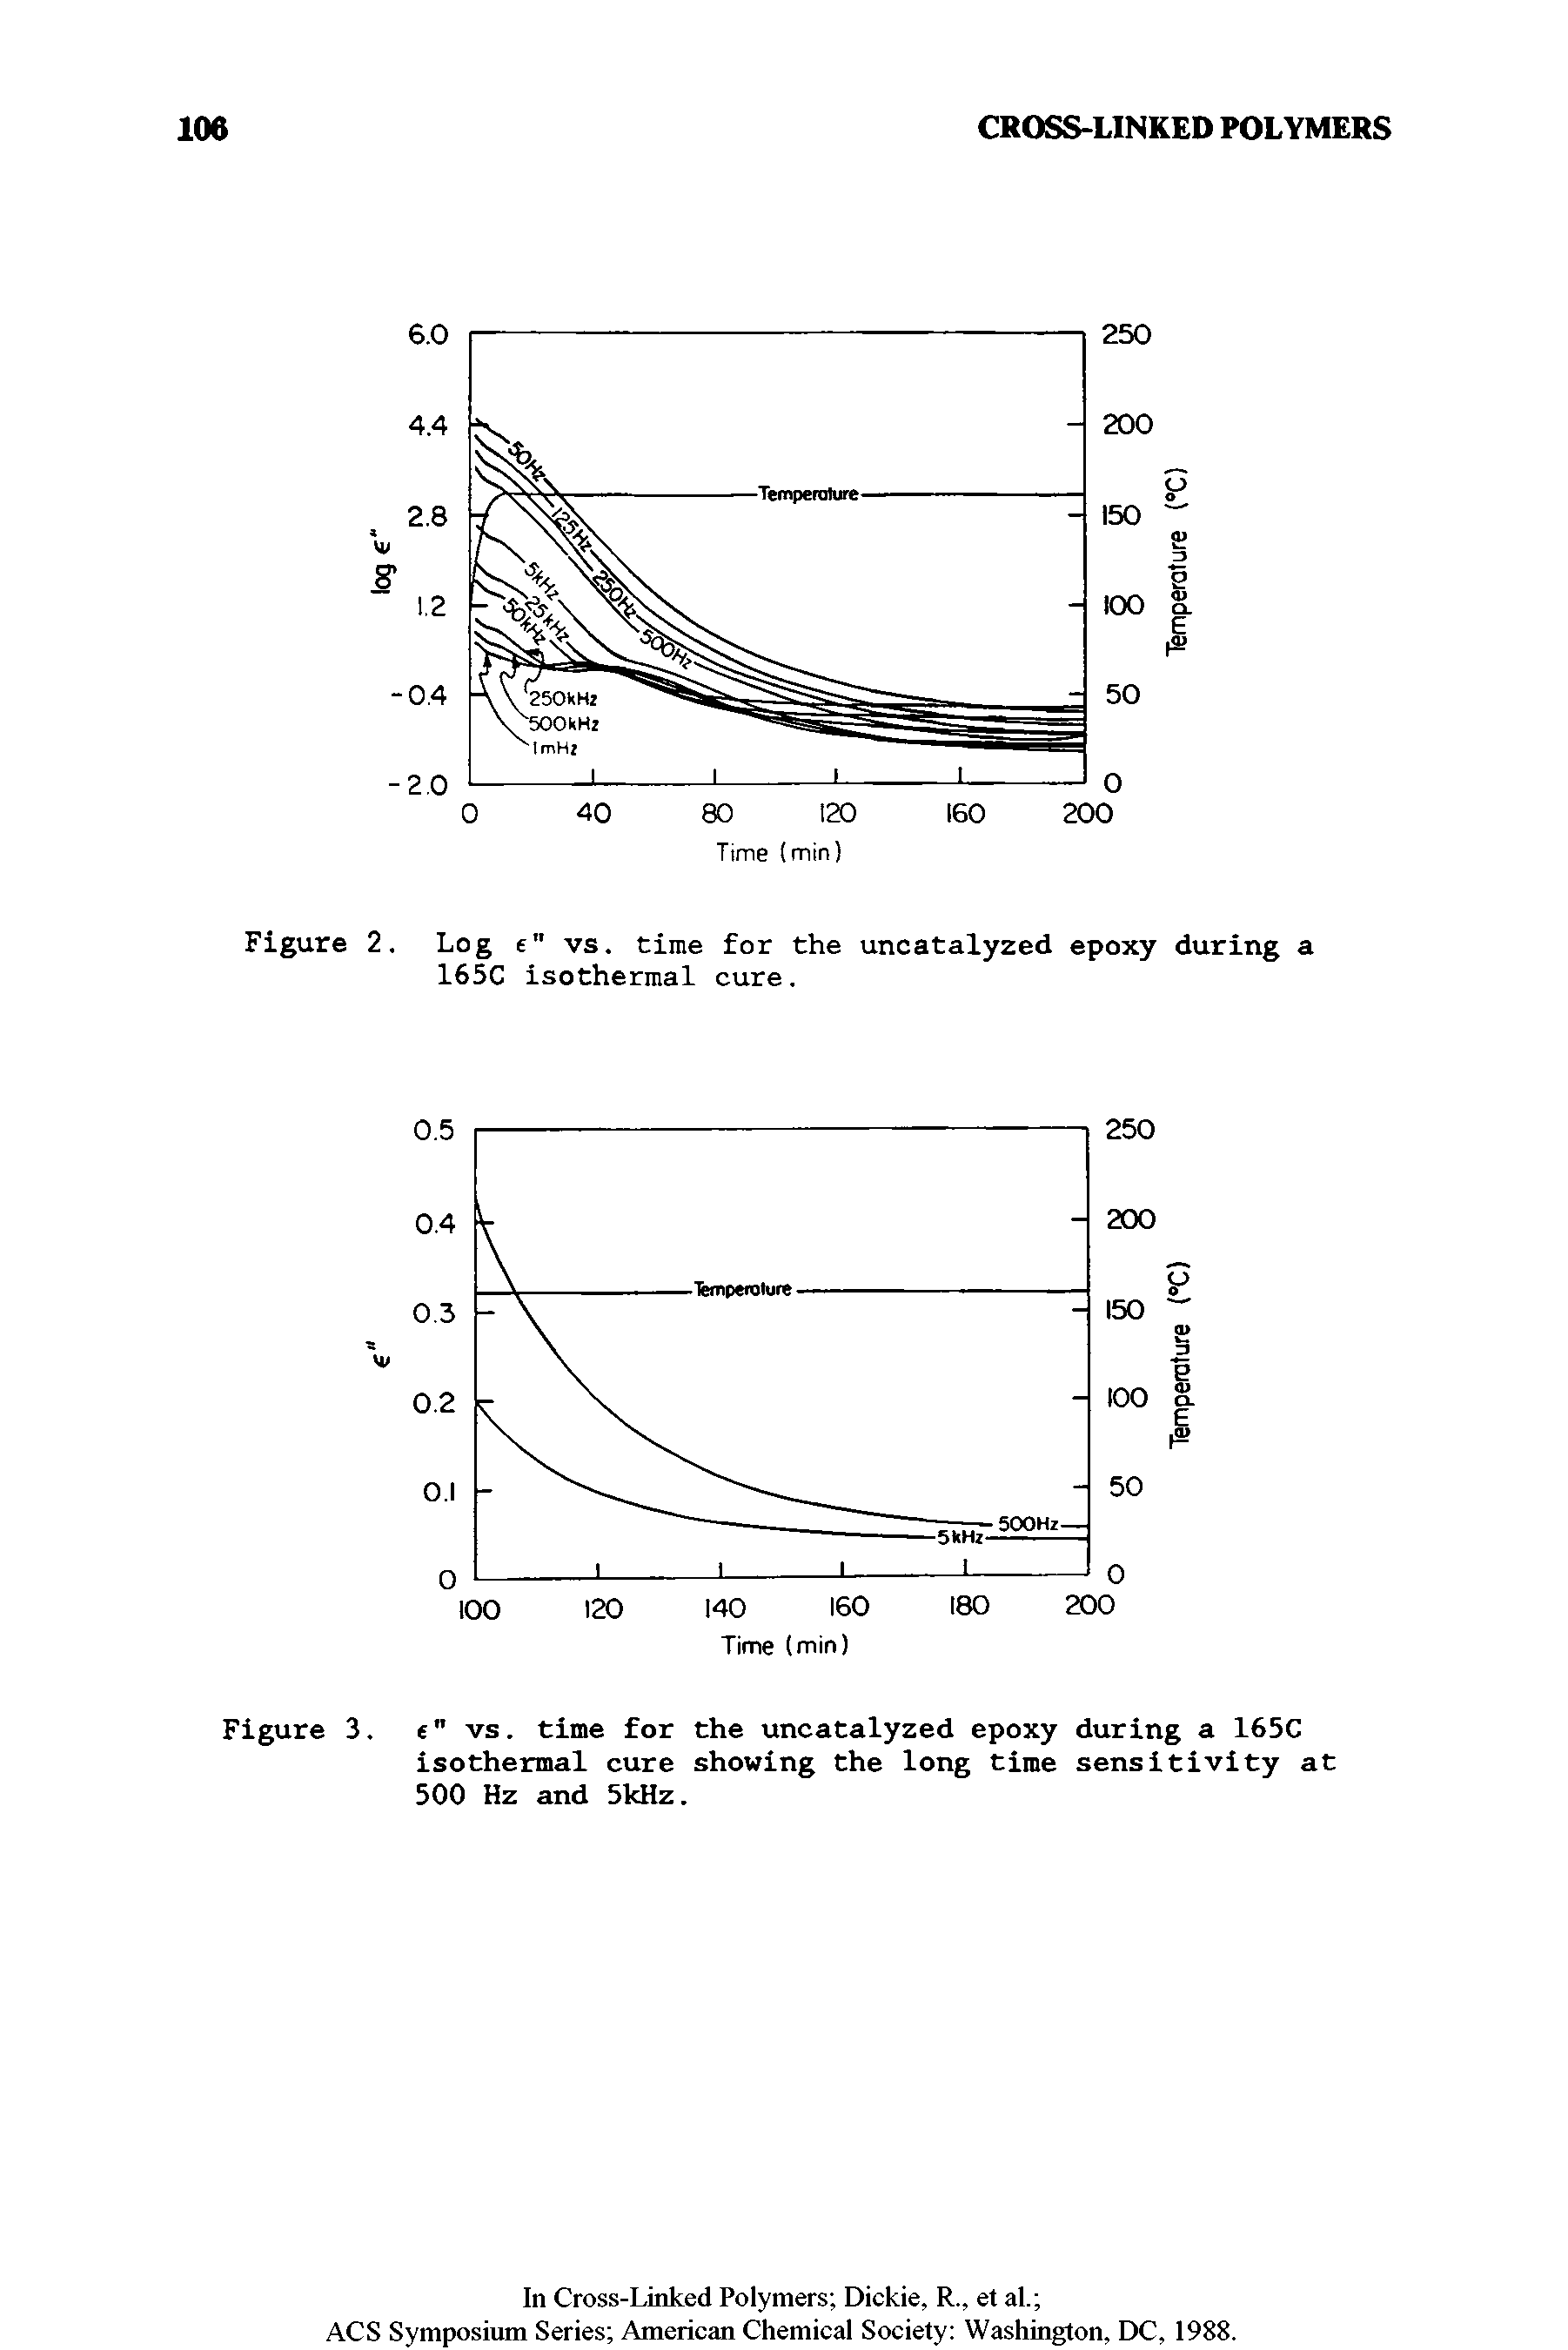 Figure 2. Log e" vs. time for the uncatalyzed epoxy during a 165C isothermal cure.